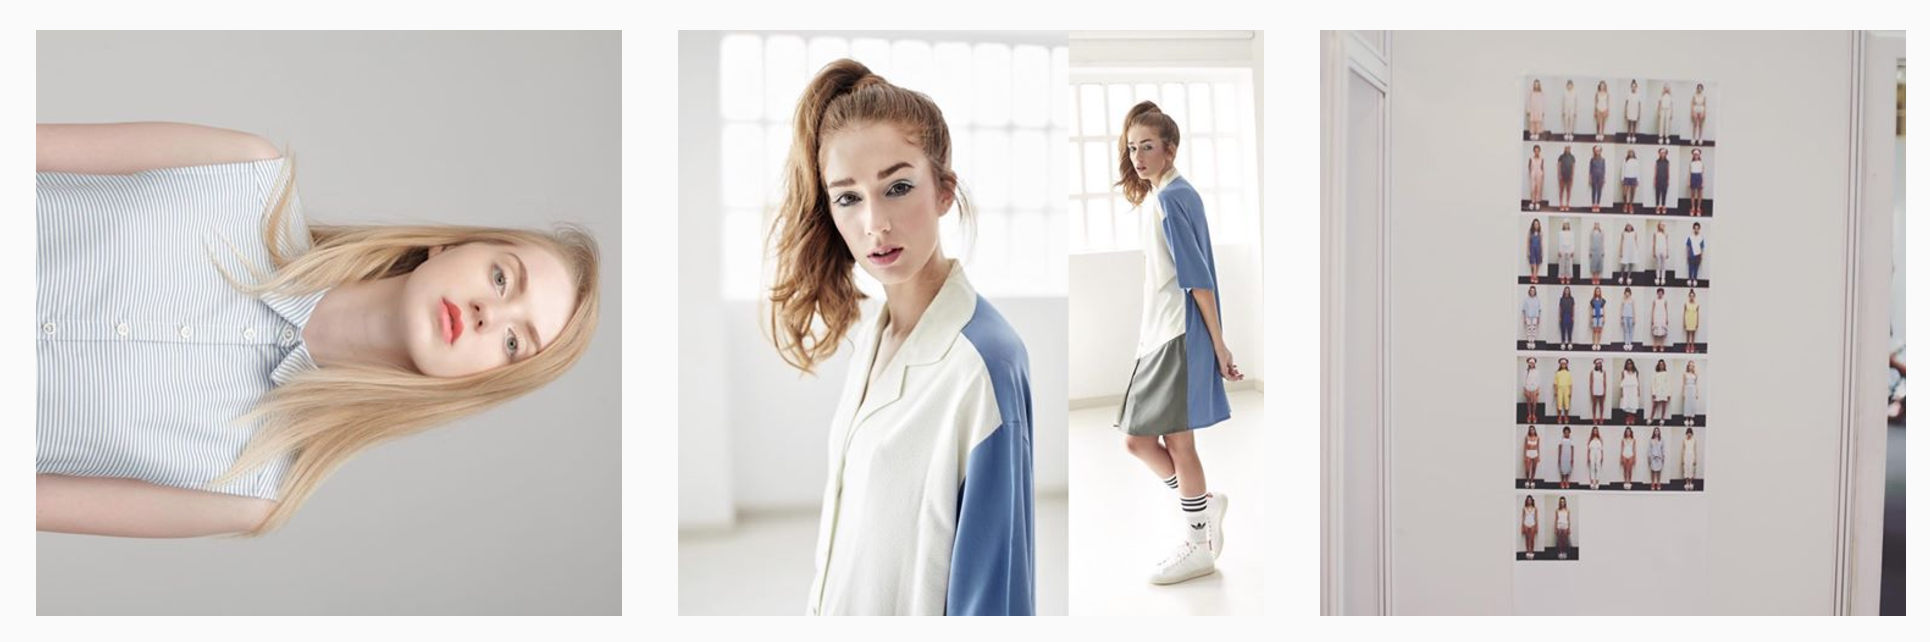 Sporty by Rita Row eCommerce fashion photography image of girl in white, blue and gray polo dress